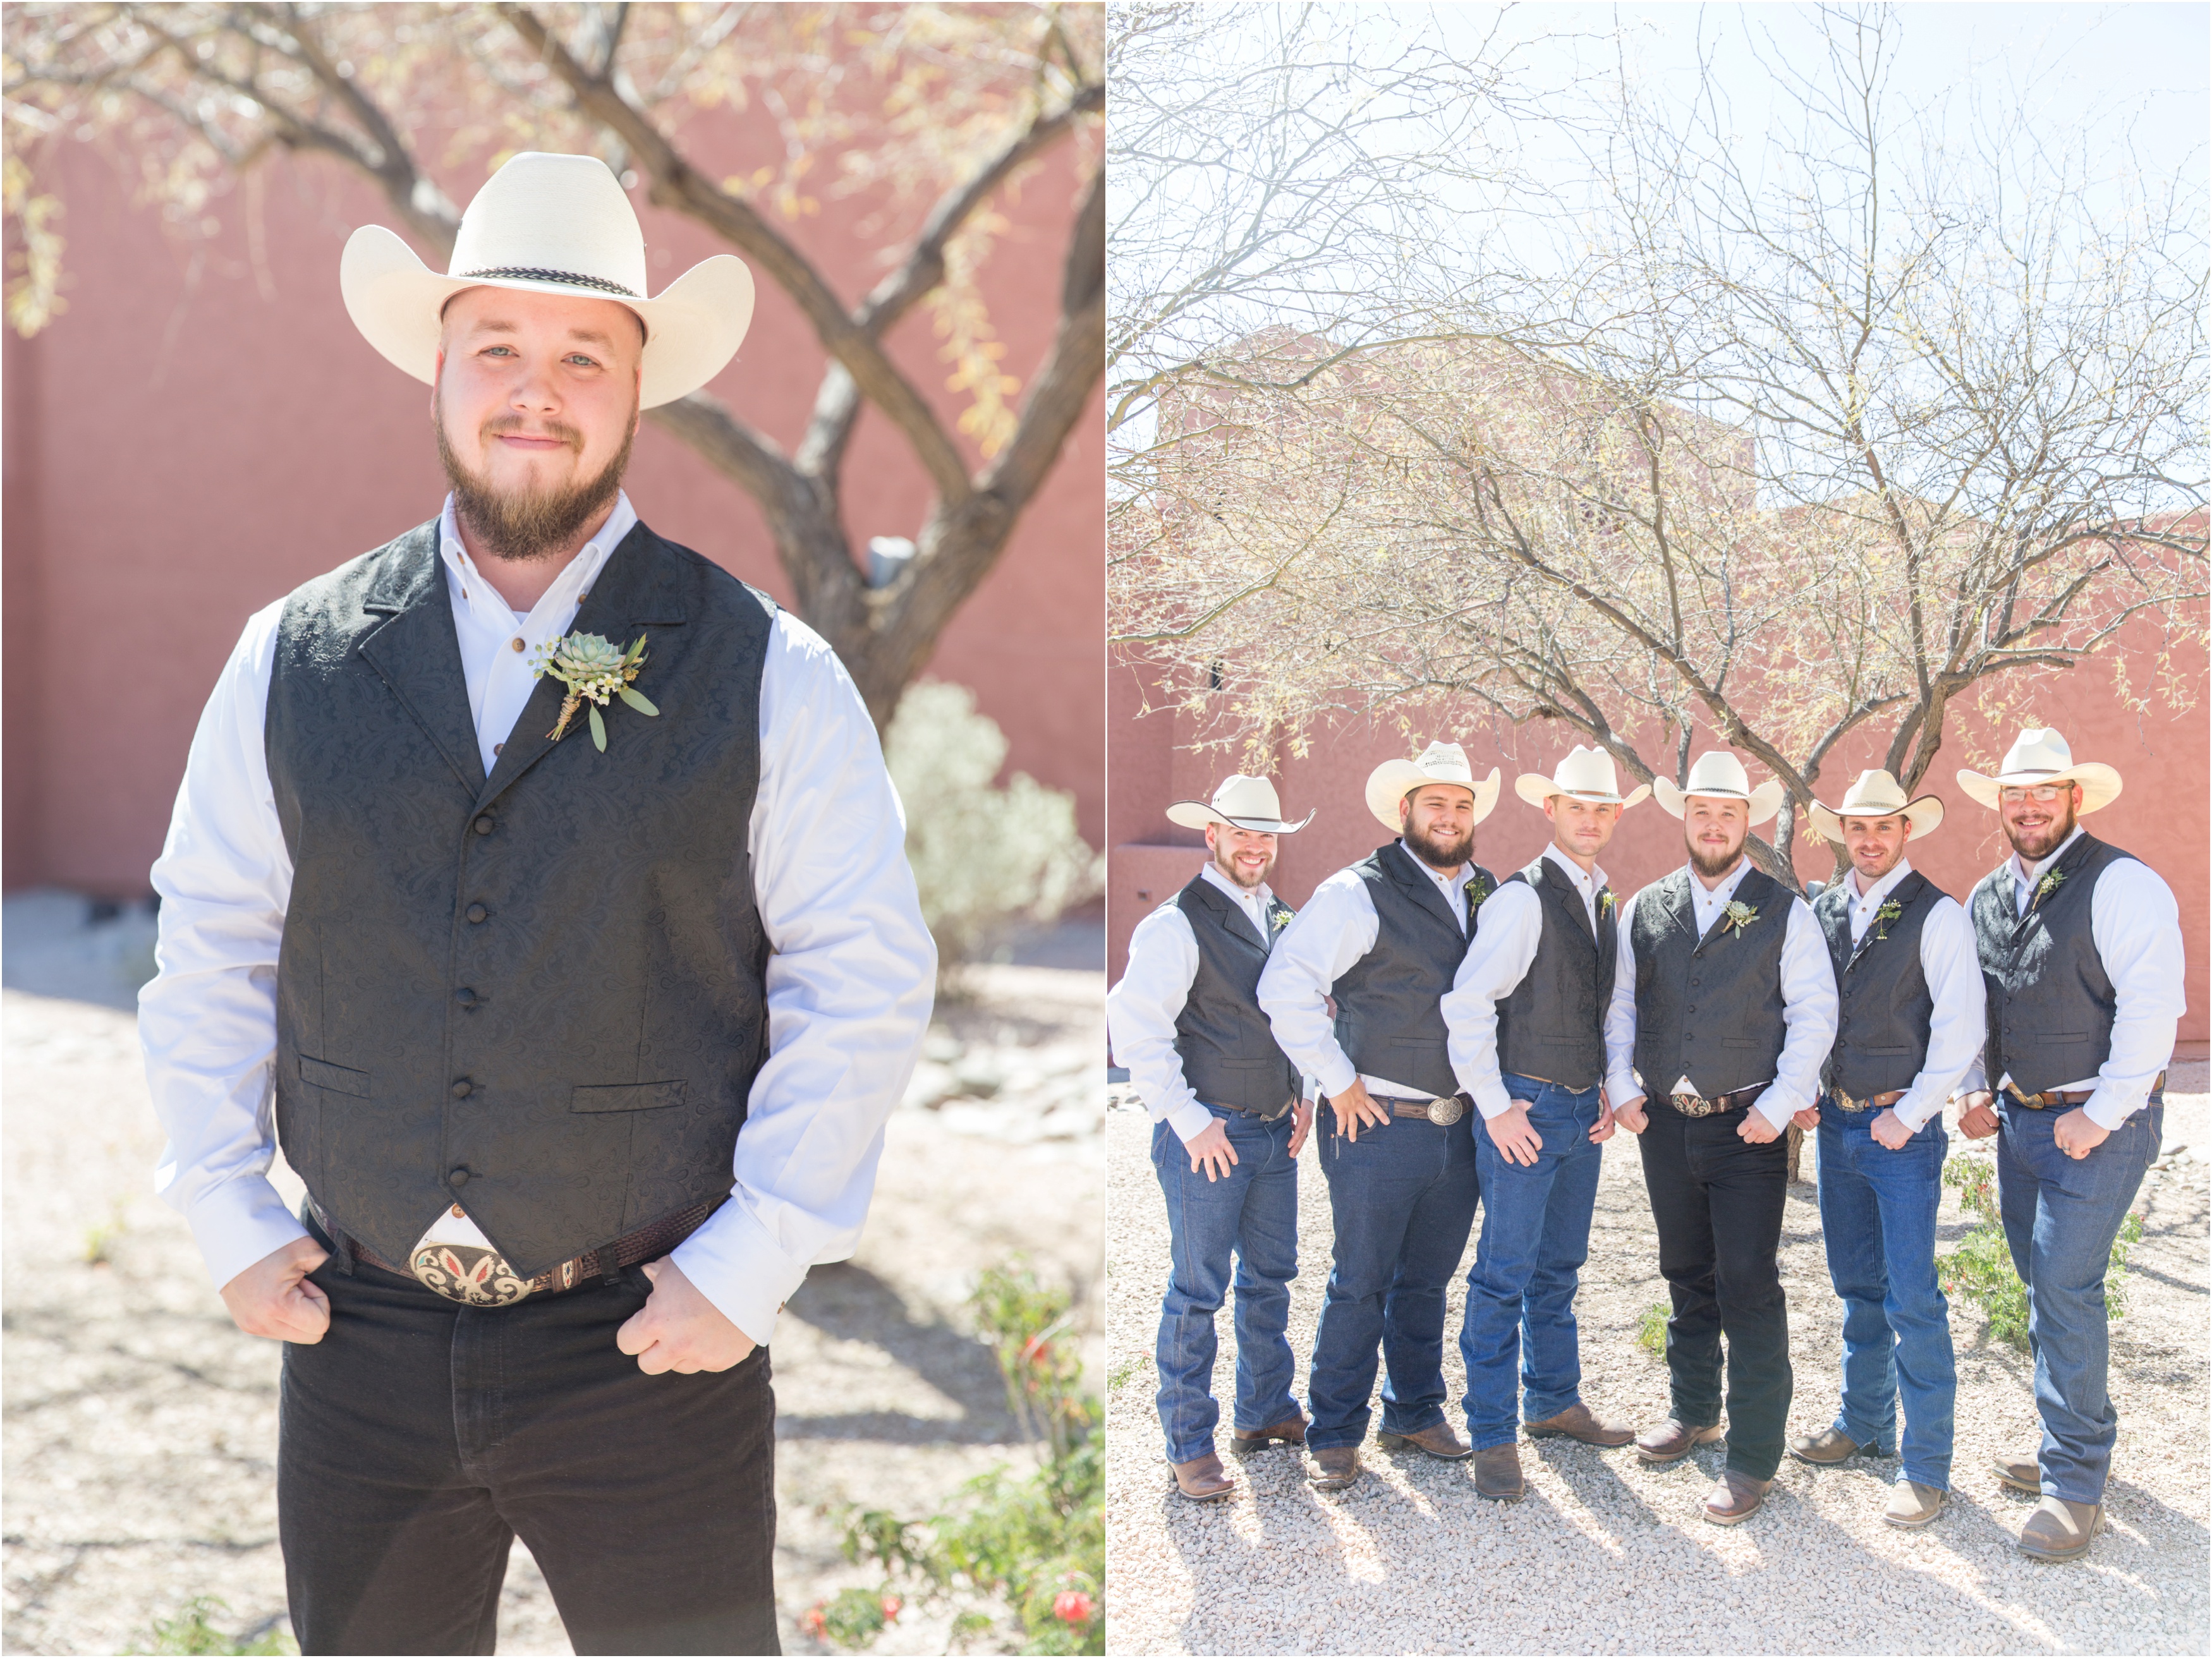 Rustic Country Wedding- Riane Roberts Photography- Blog Post